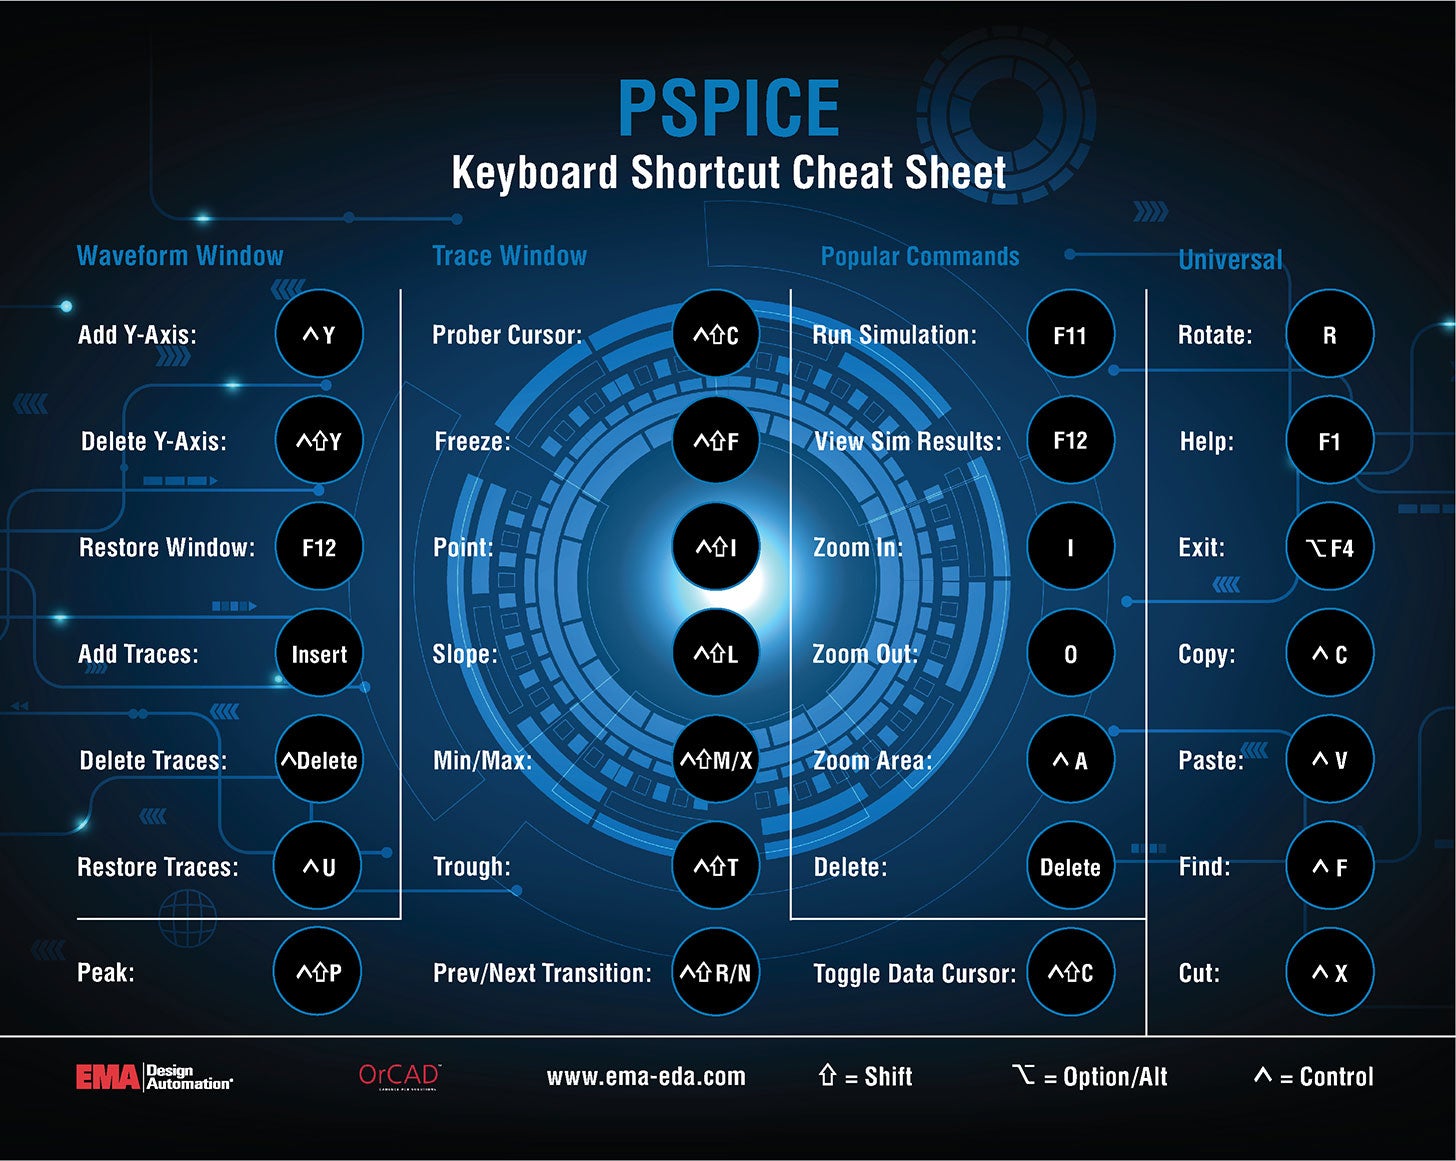 PSpice keyboard shortcuts infographic